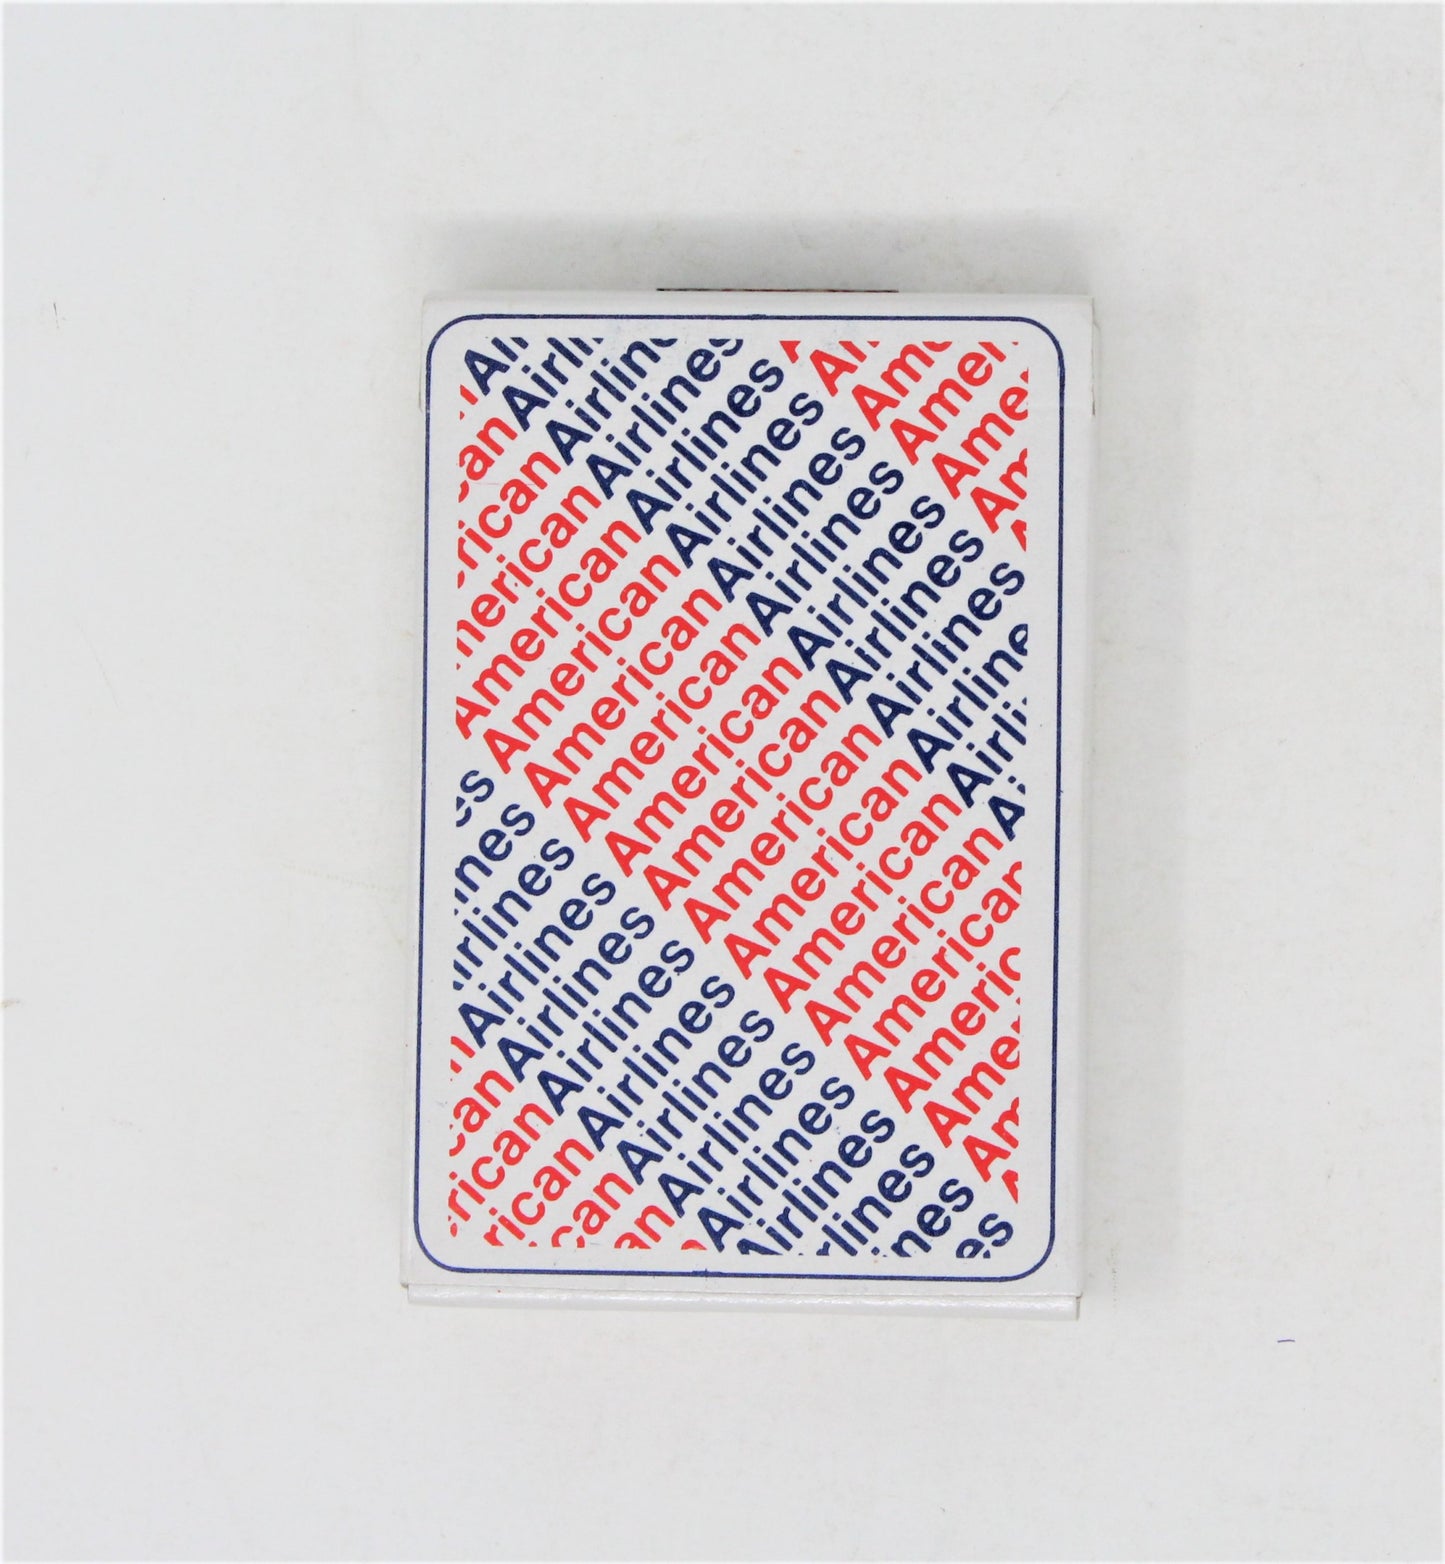 Playing Cards, American Airlines, Logo / Wordmark, Wessco, Unopened, Vintage